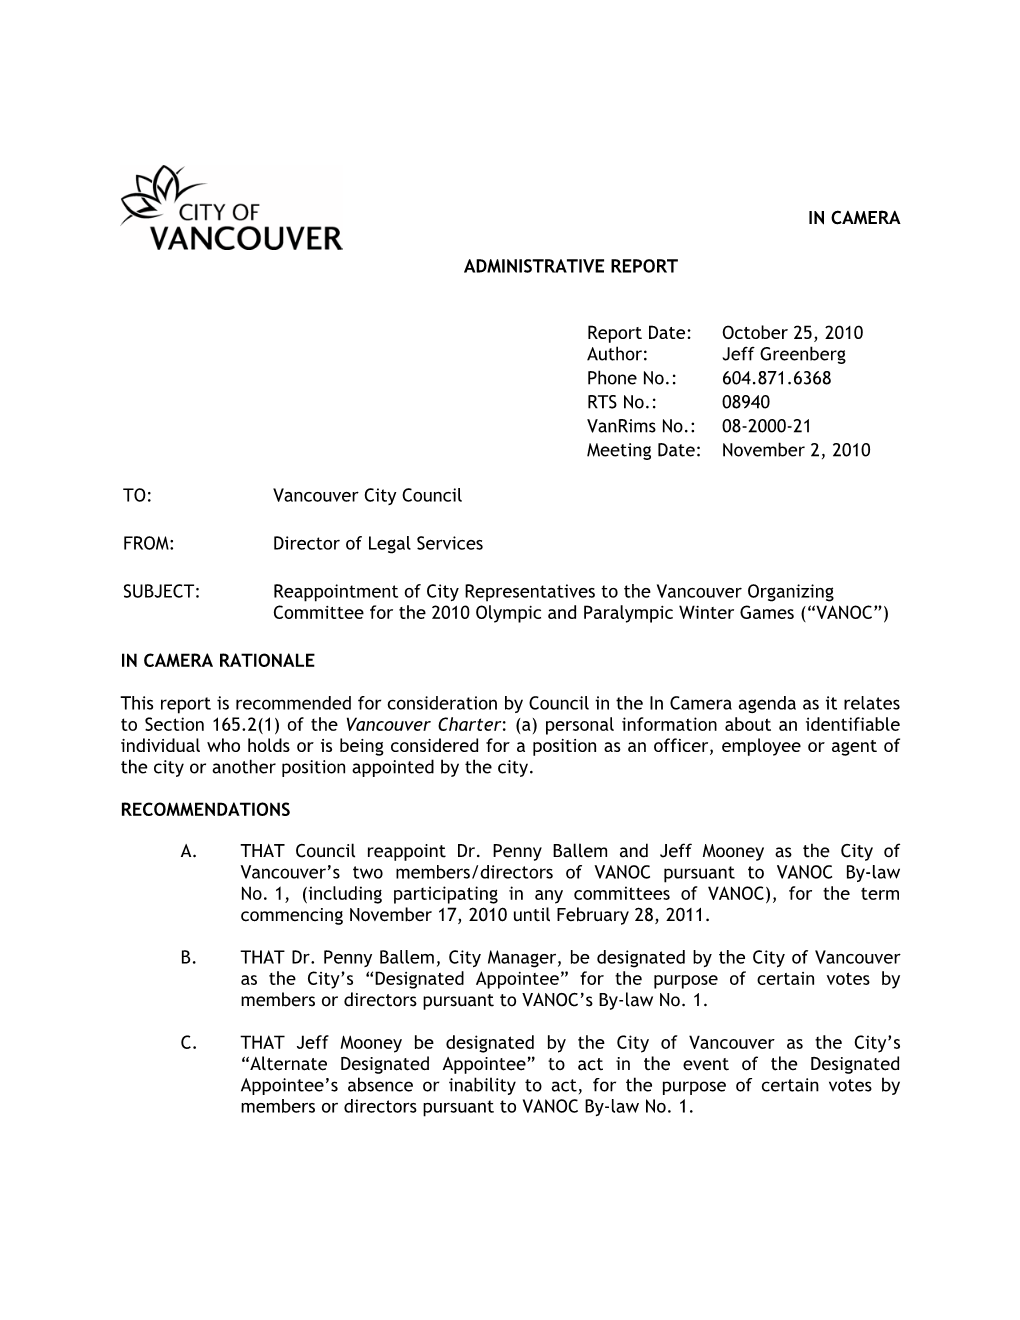 Reappointment of City Representatives to the Vancouver Organizing Committee for the 2010 Olympic and Paralympic Winter Games (“VANOC”)